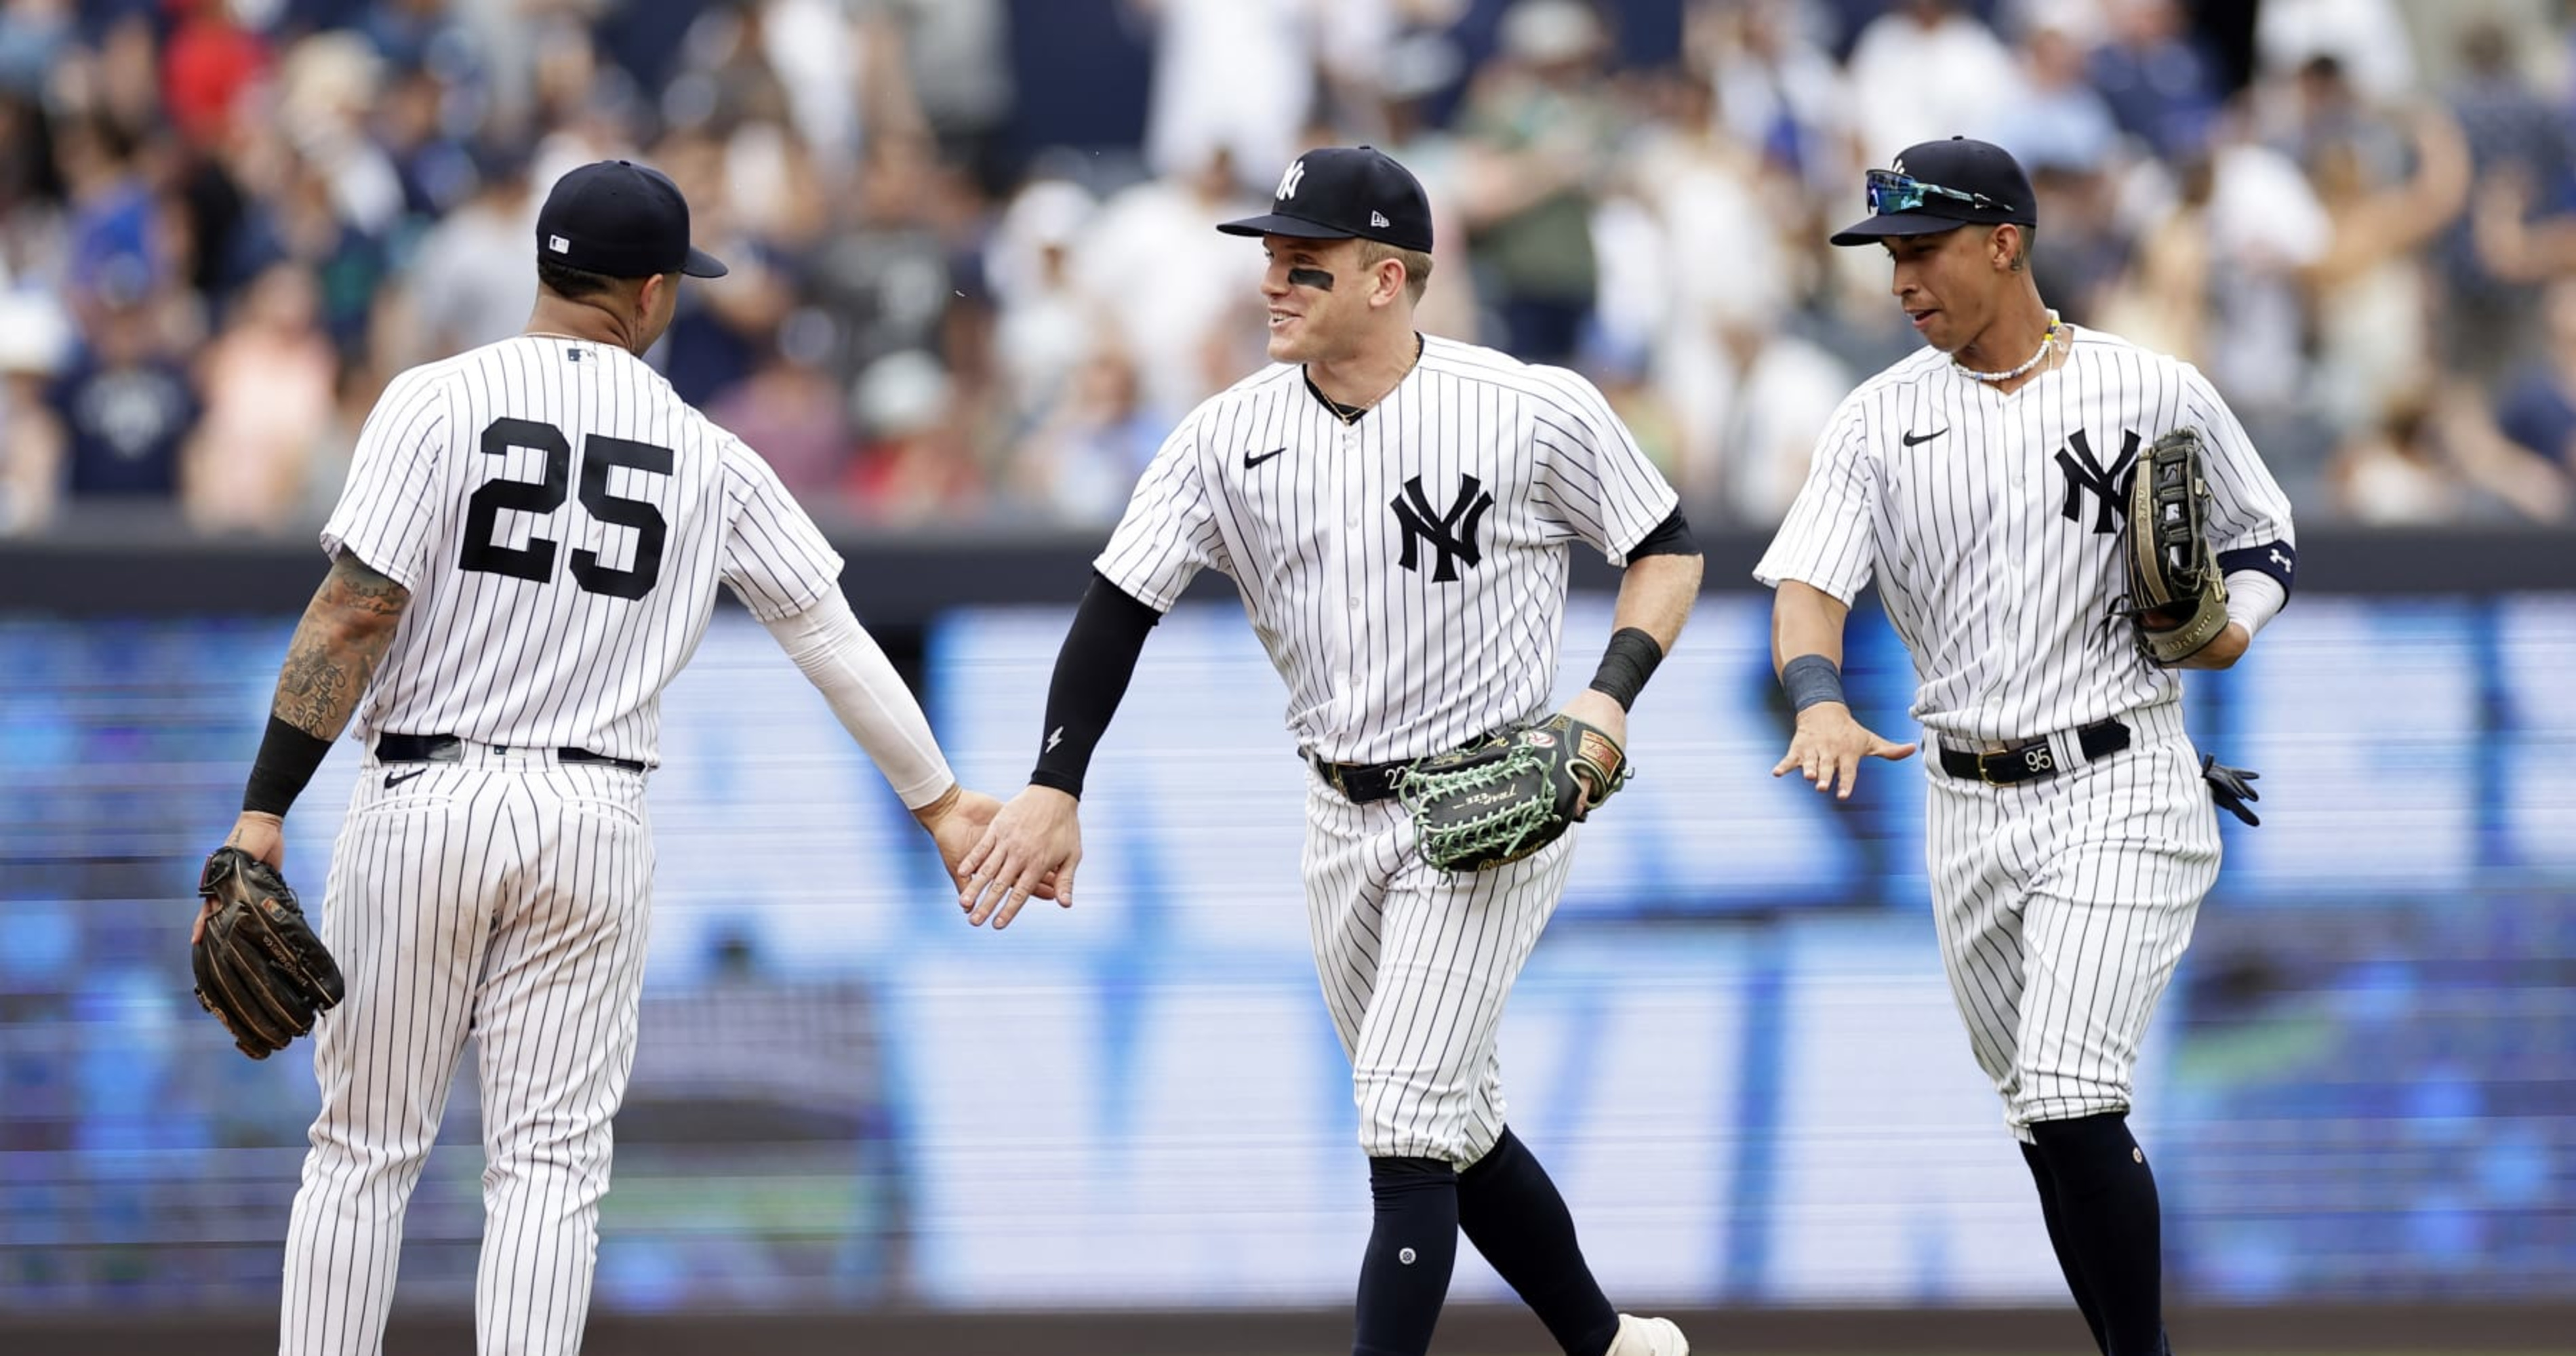 Yankees Jersey Patch Deal Is MLB's Richest at $25M a Year